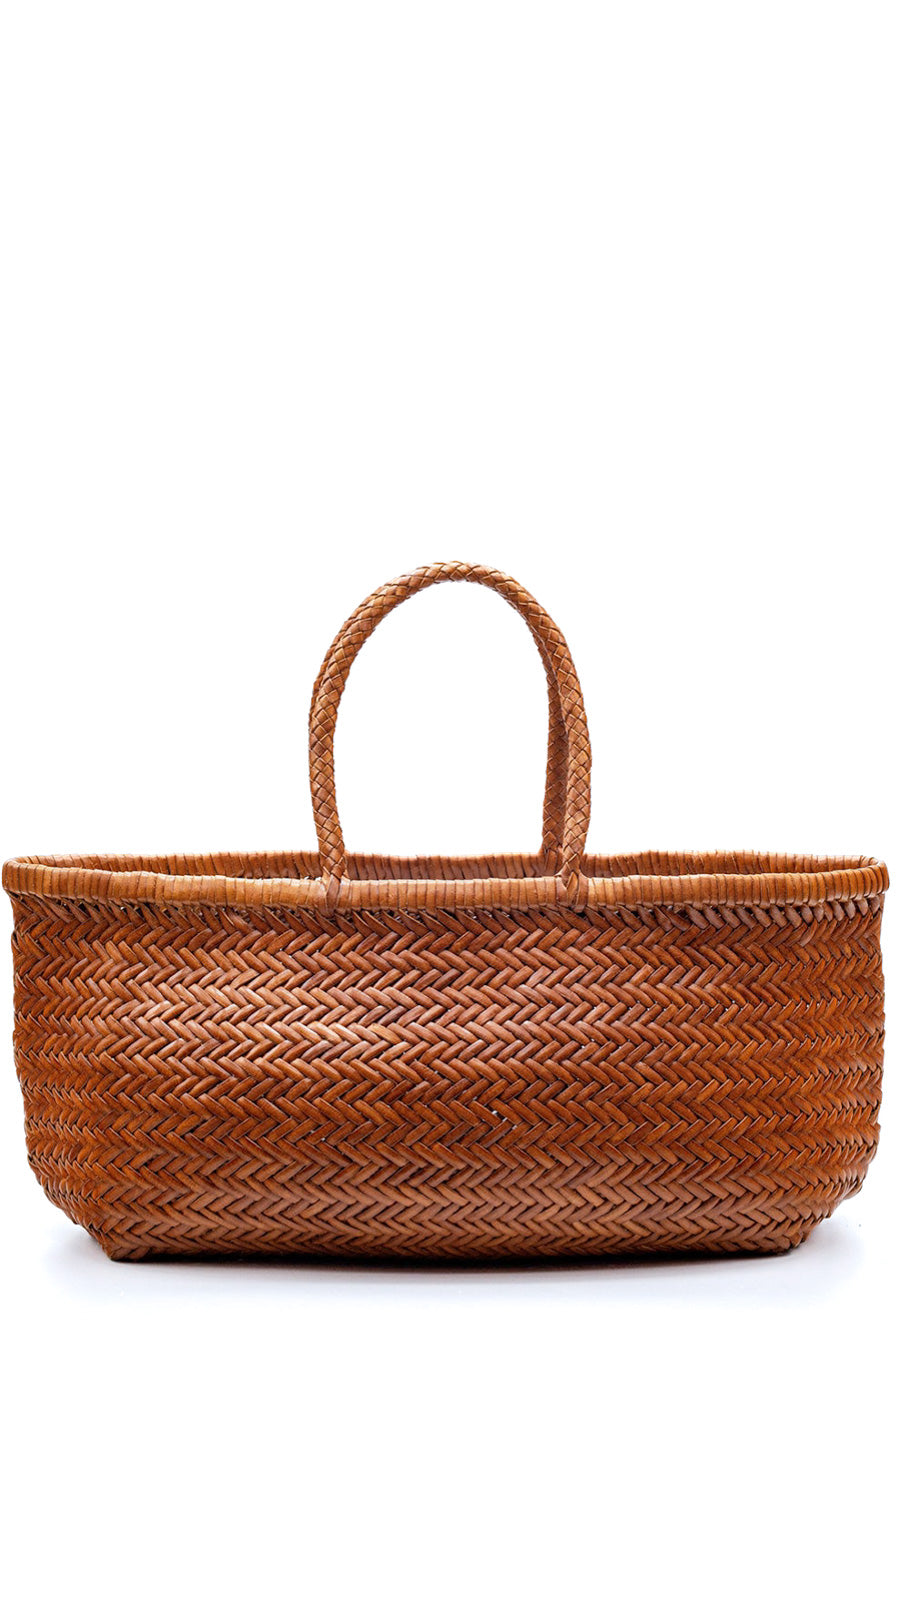 This is the bigger version of Dragon Diffusion’s iconic, best-selling bag — a roomy, hand-woven basket in smooth, buffalo calf leather. Handcrafted by artisan weavers in one piece, the diagonal chevron weave is what makes this style unique. And, remaining true to traditional basket weaving techniques, the bag comes unlined with an open top. Ideal for your next beach outing or a trip to your local market.